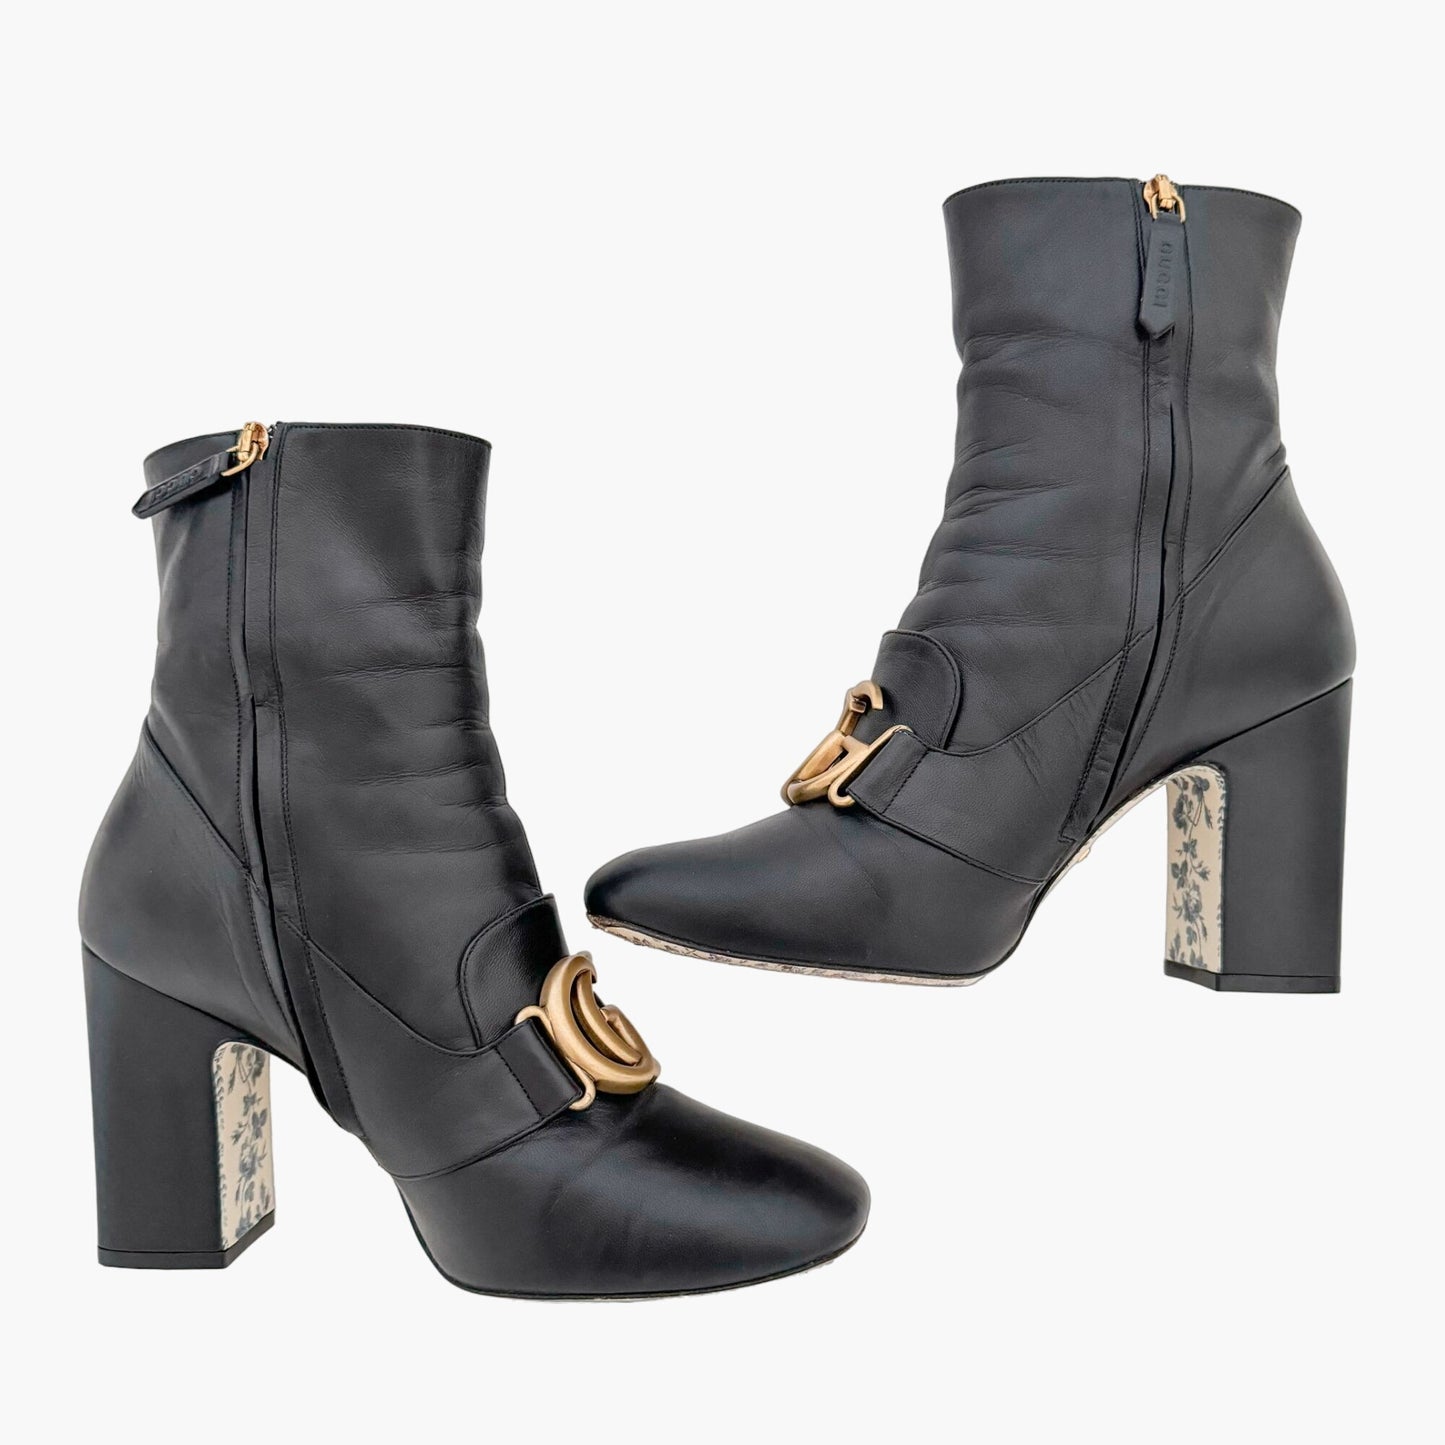 Gucci Victoire Ankle Boots in Black Leather Size 39